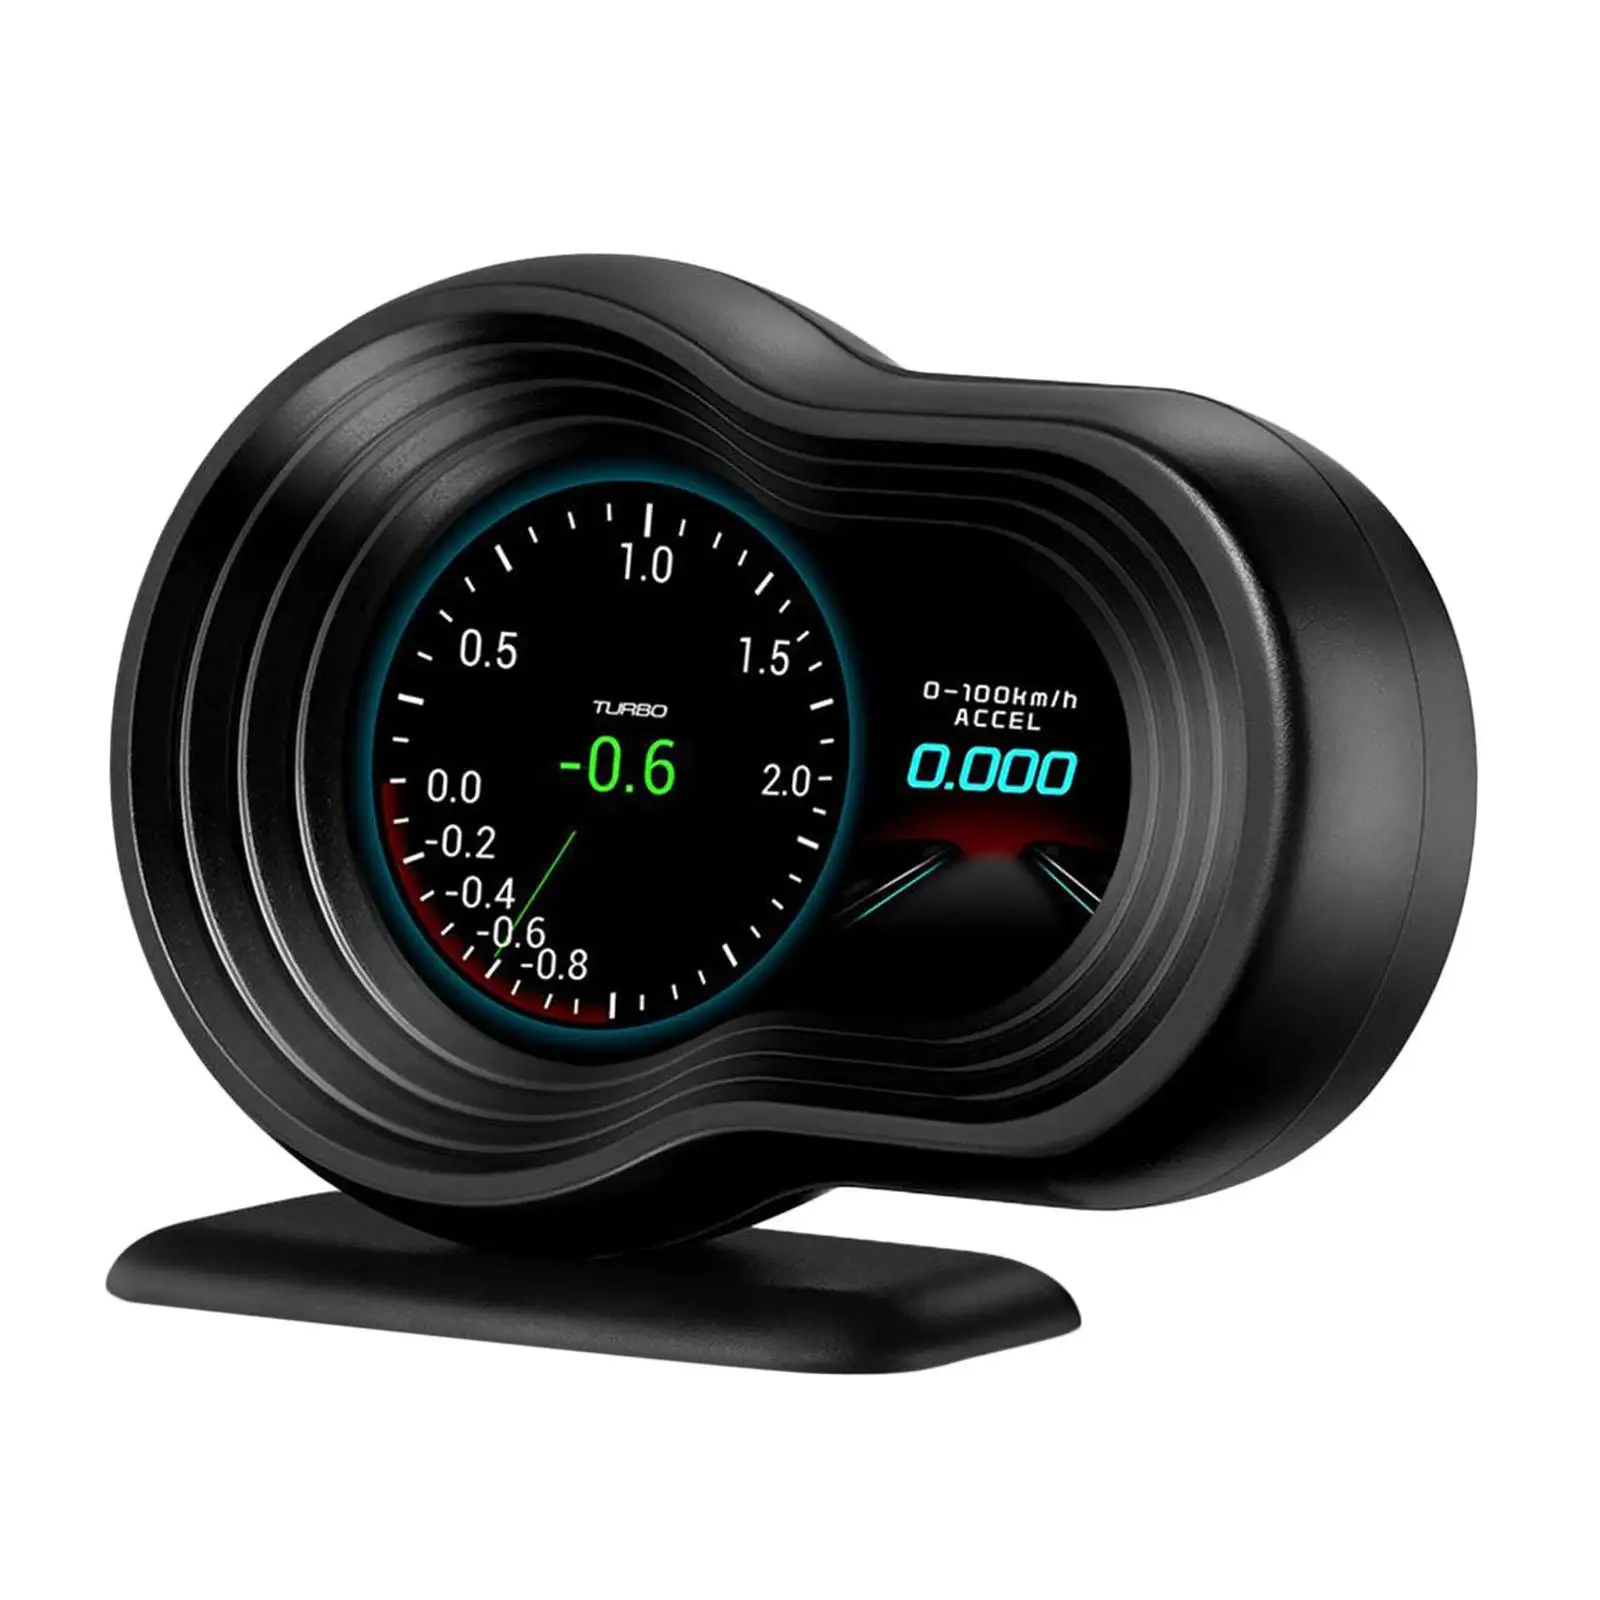   Mode 3.5 HUD II / Interface Vehicle  KM/h Engine RPM Mileage Measurement for All Vehicles ometer